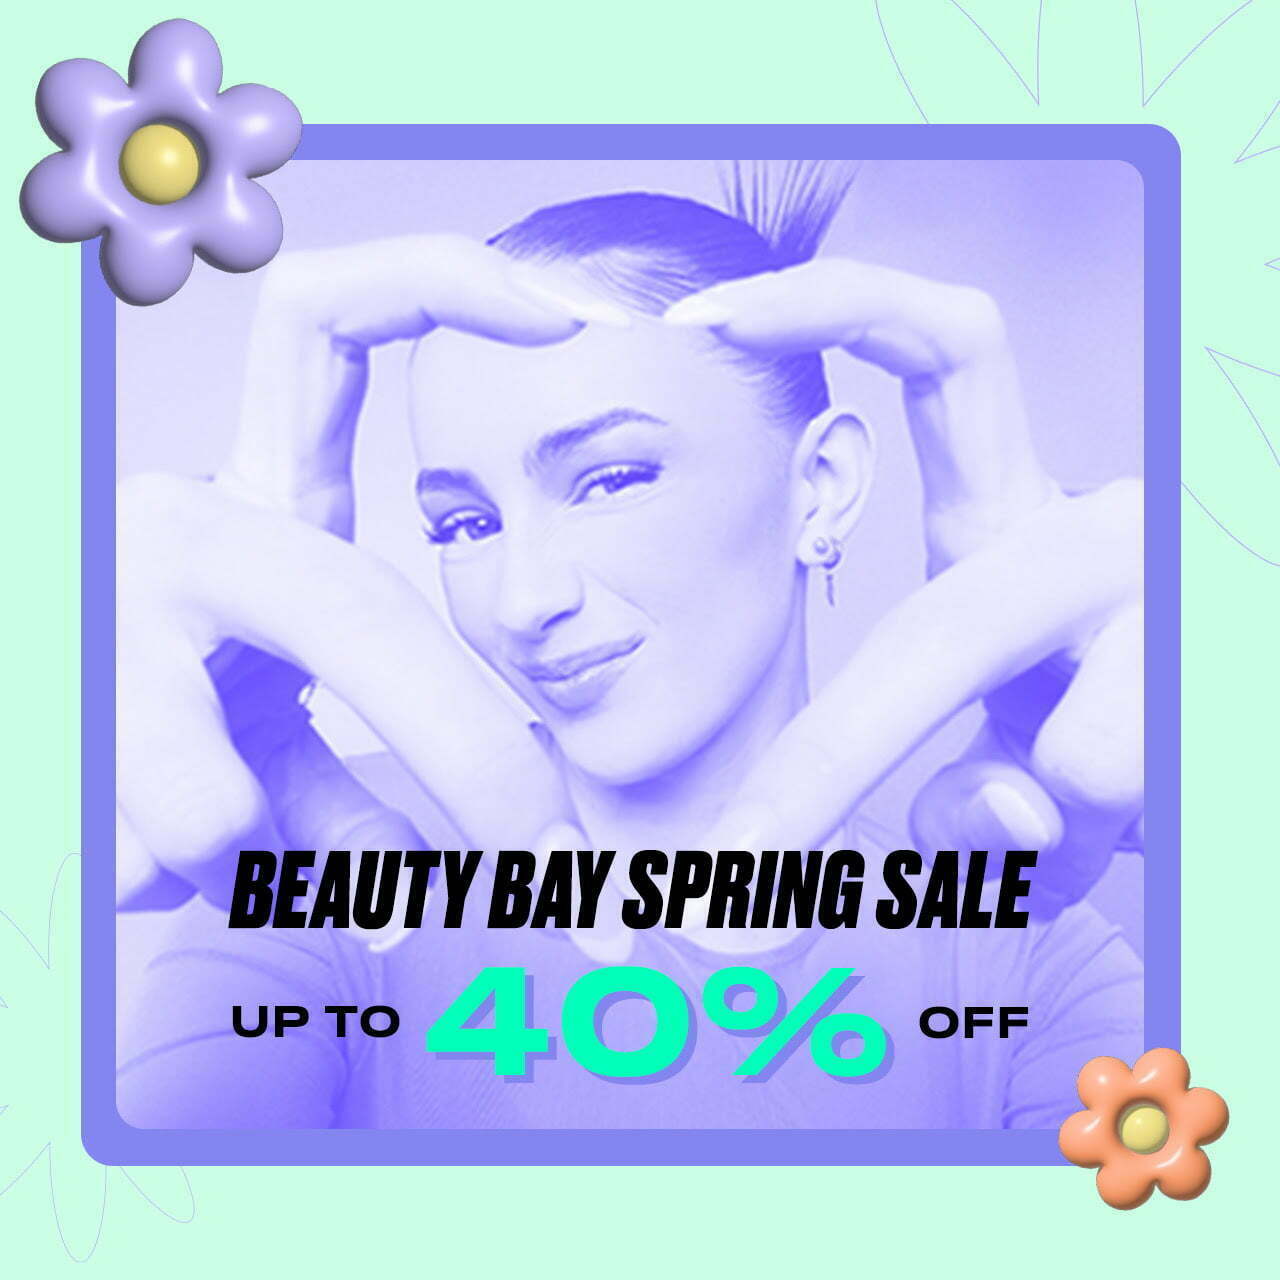 Up to 40% off sitewide at BEAUTY BAY